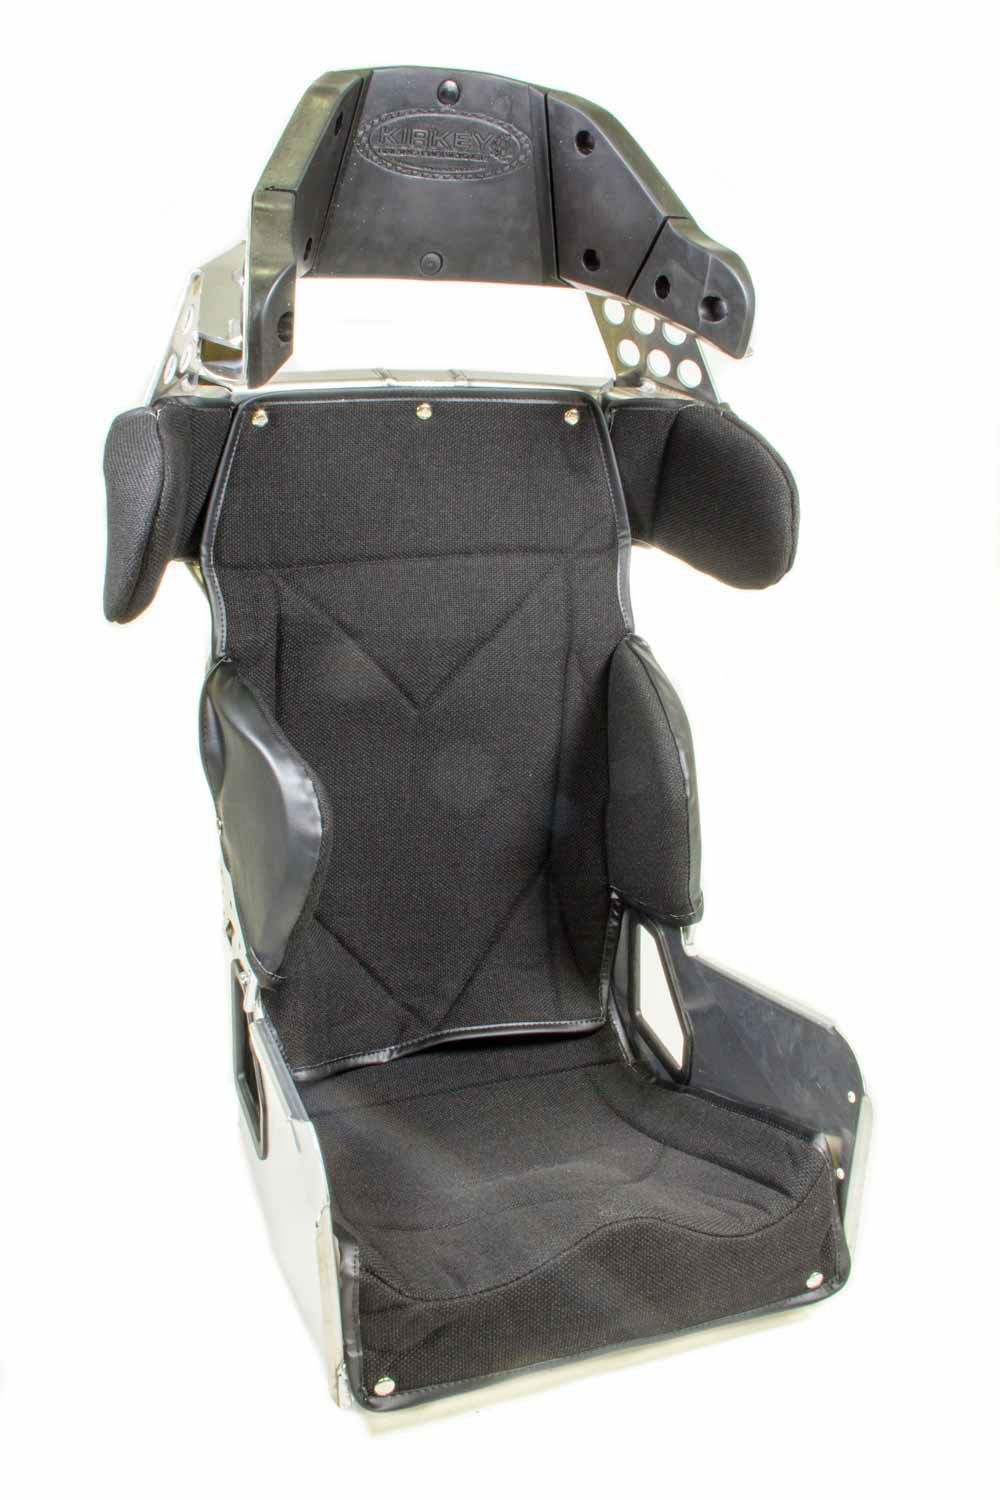 Kirkey Racing Seats 7017011 Seat Cover, Snap Attachment, Tweed, Black, Kirkey 70 Series Oval, 17 in Wide Seat, Each